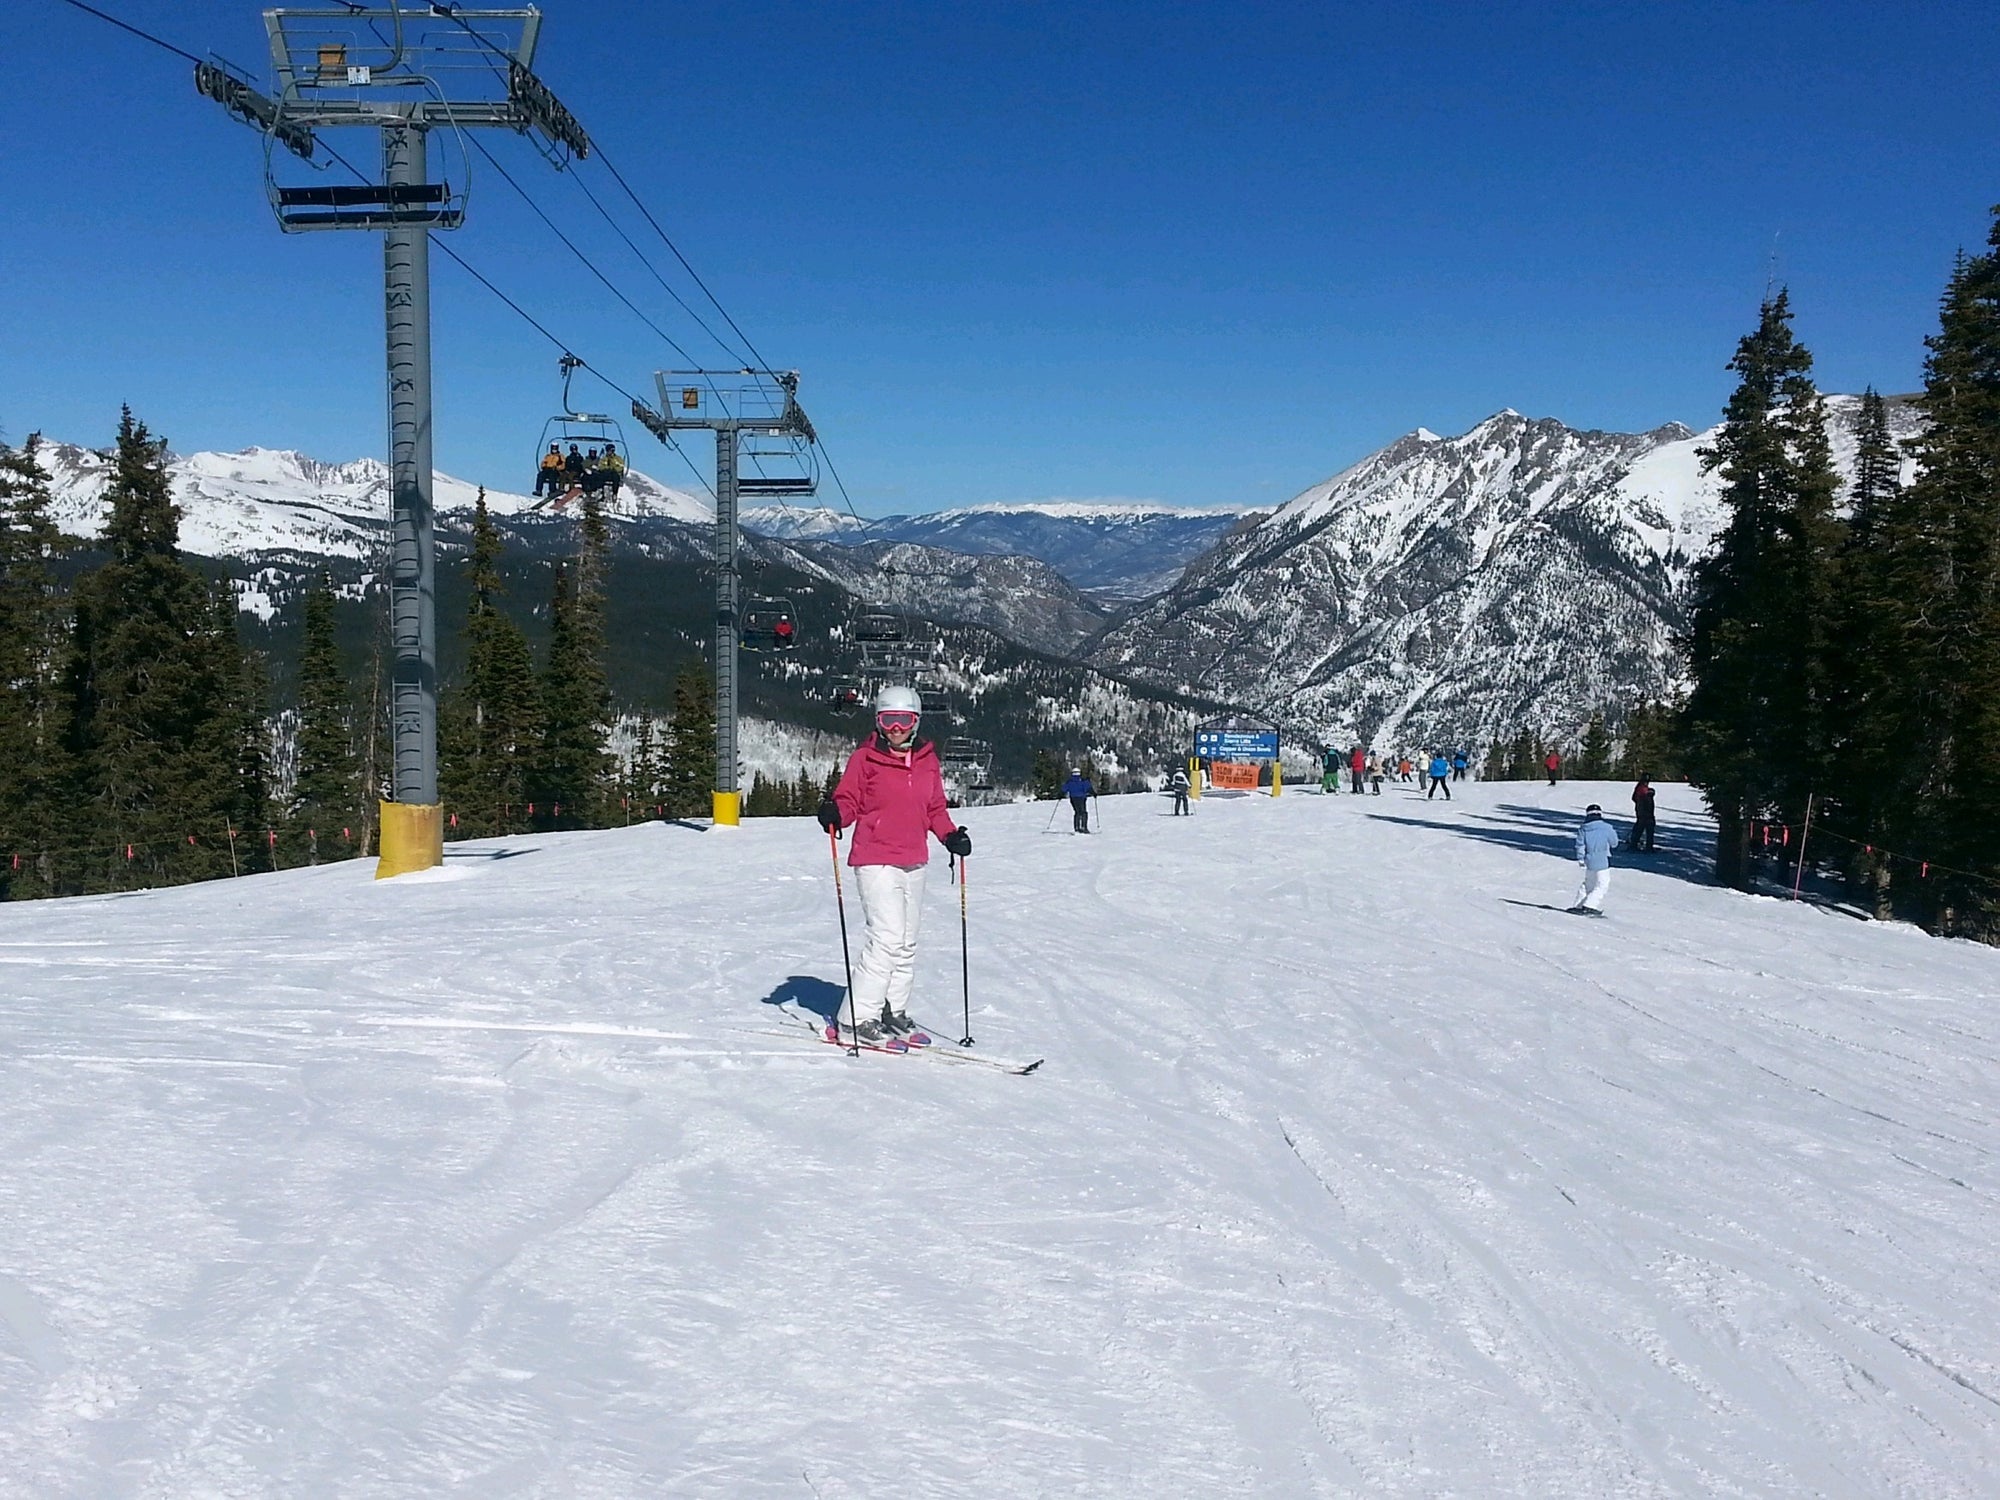 How to Select the Best Base Layer for Skiing